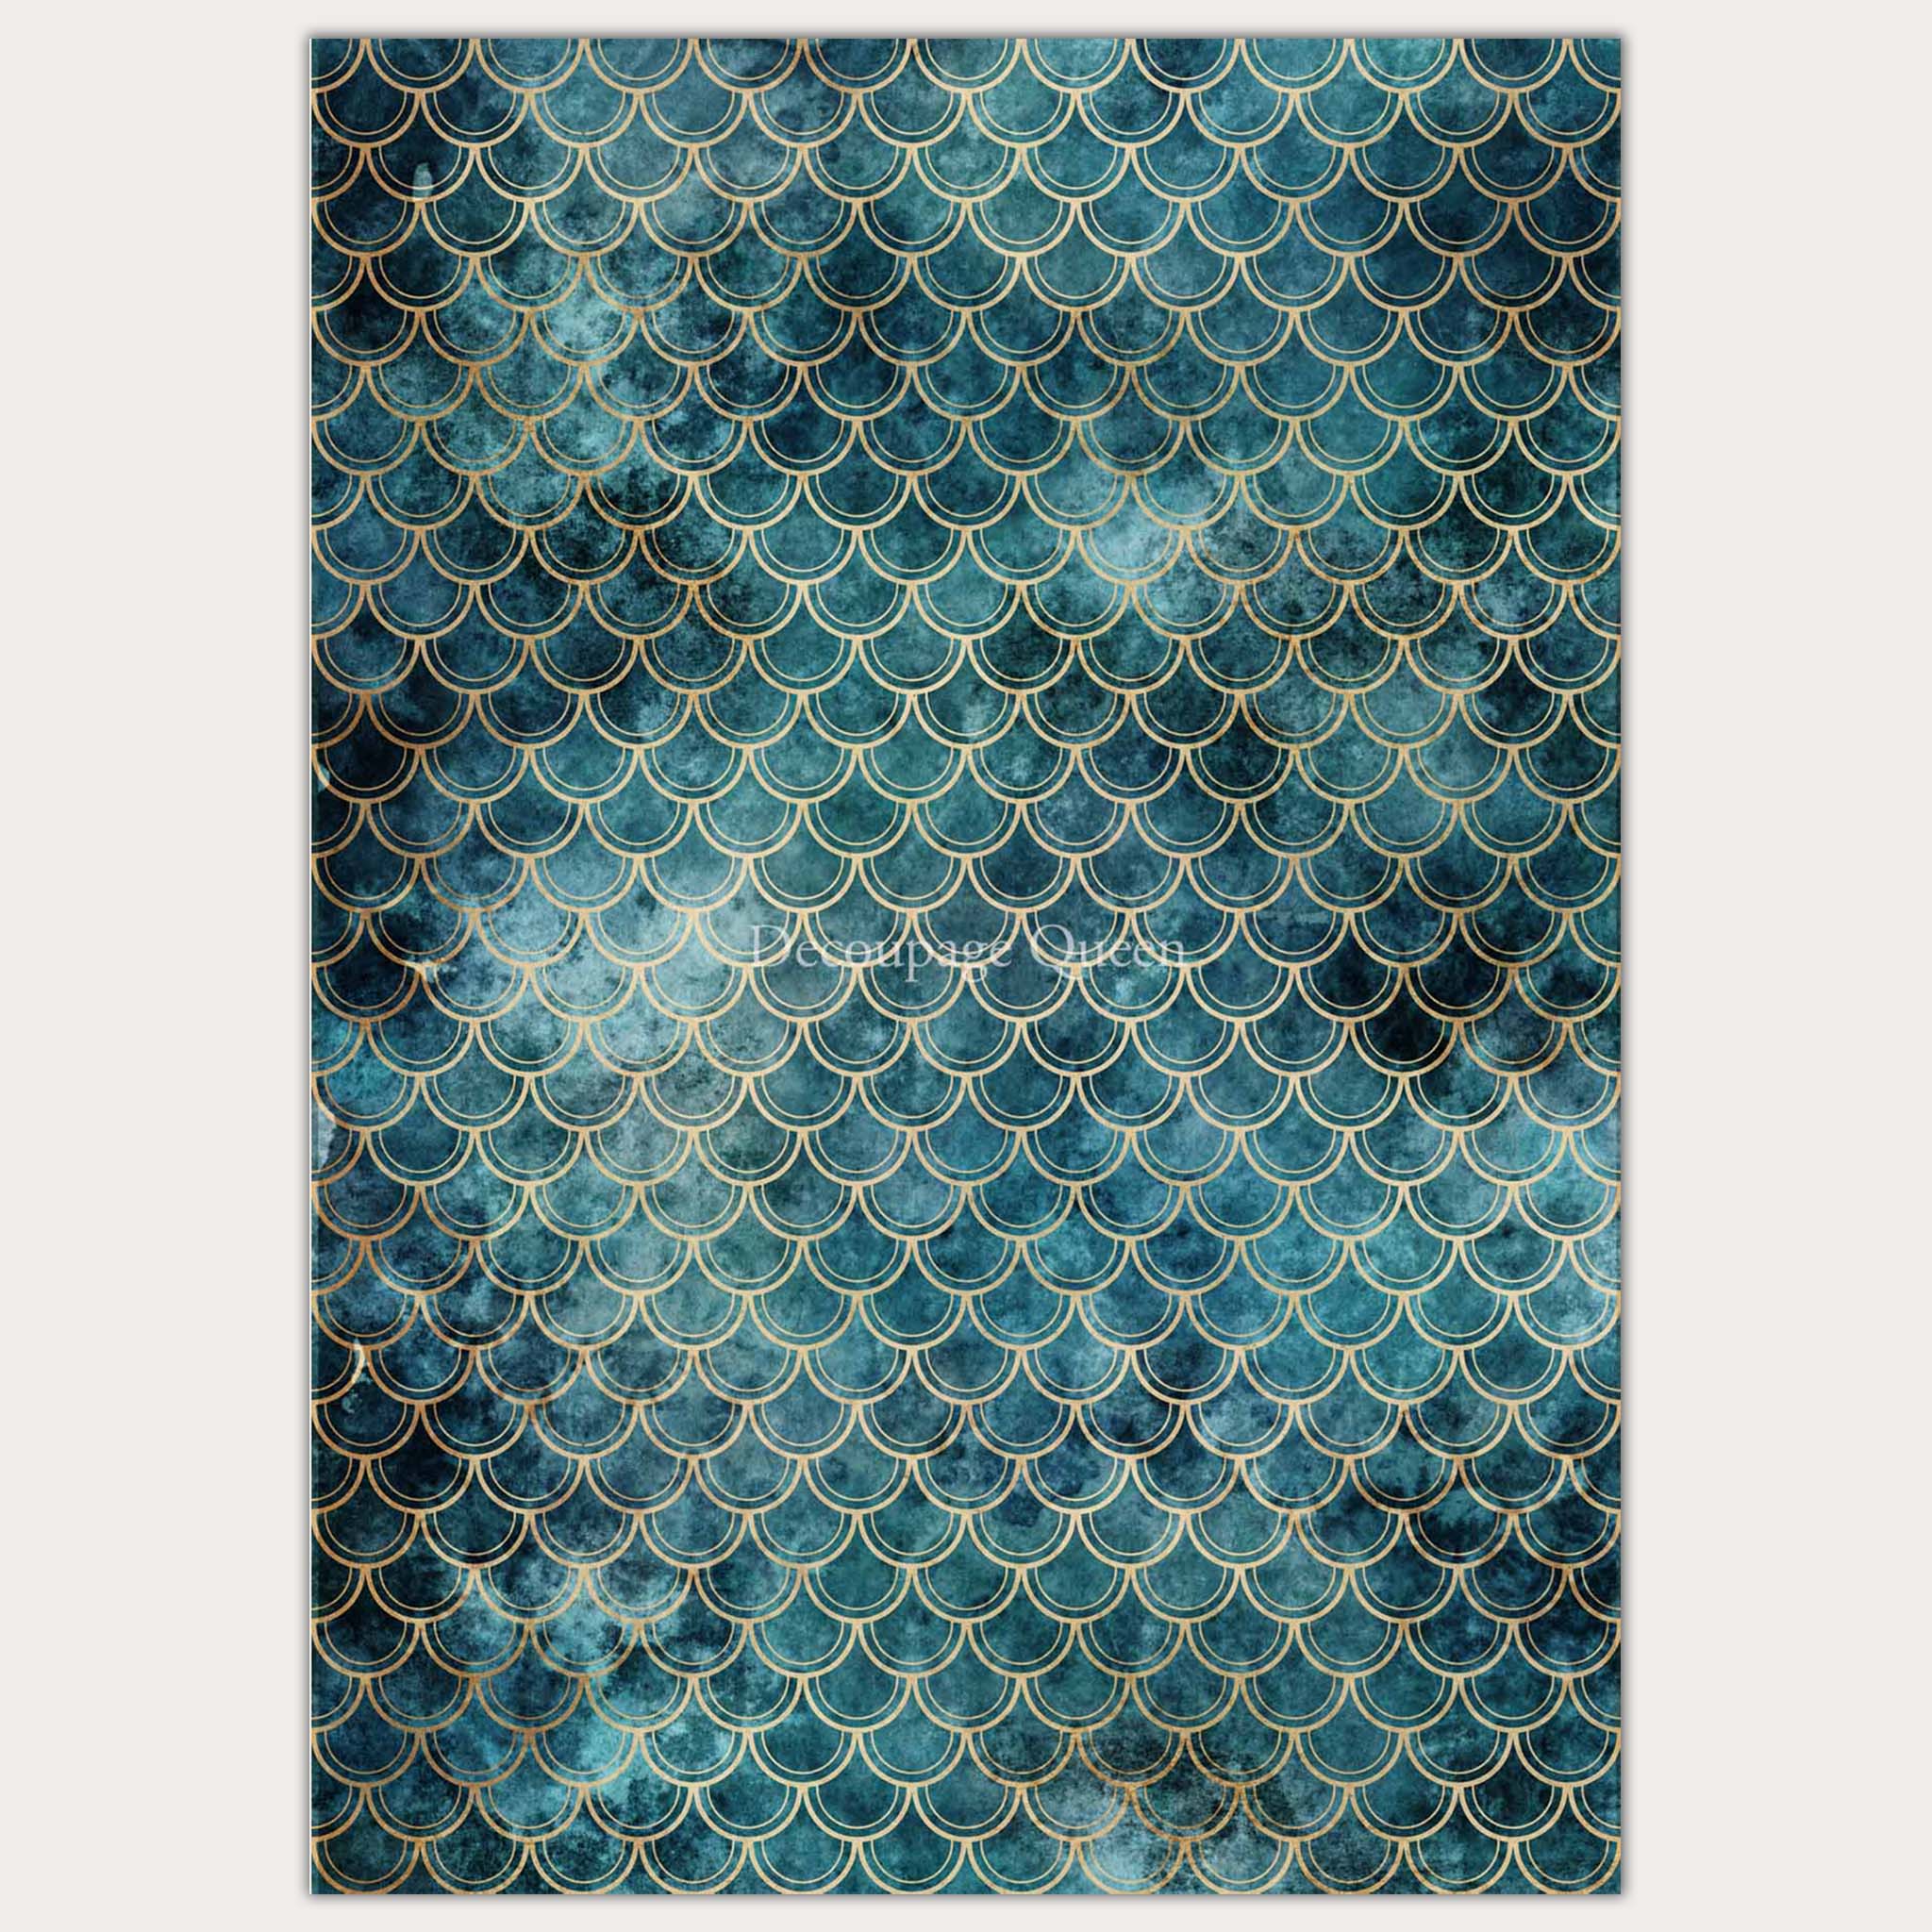 A1 rice paper design that features a blend of dark blue and teal with a gold mermaid scale pattern on it. White borders are on the sides.